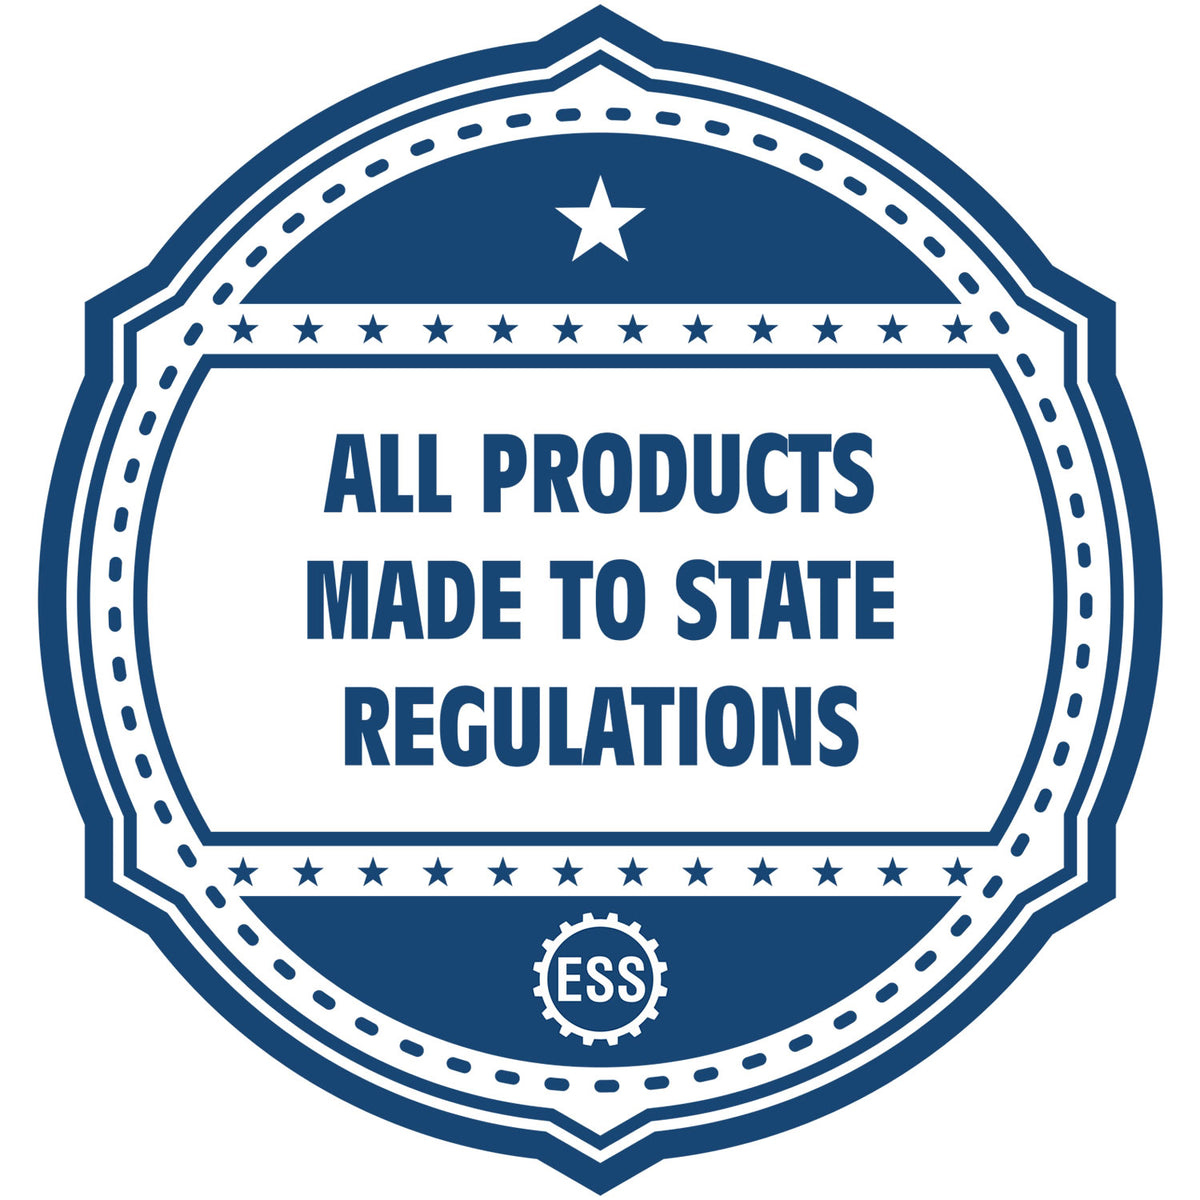 An icon or badge element for the Heavy Duty Cast Iron Tennessee Architect Embosser showing that this product is made in compliance with state regulations.